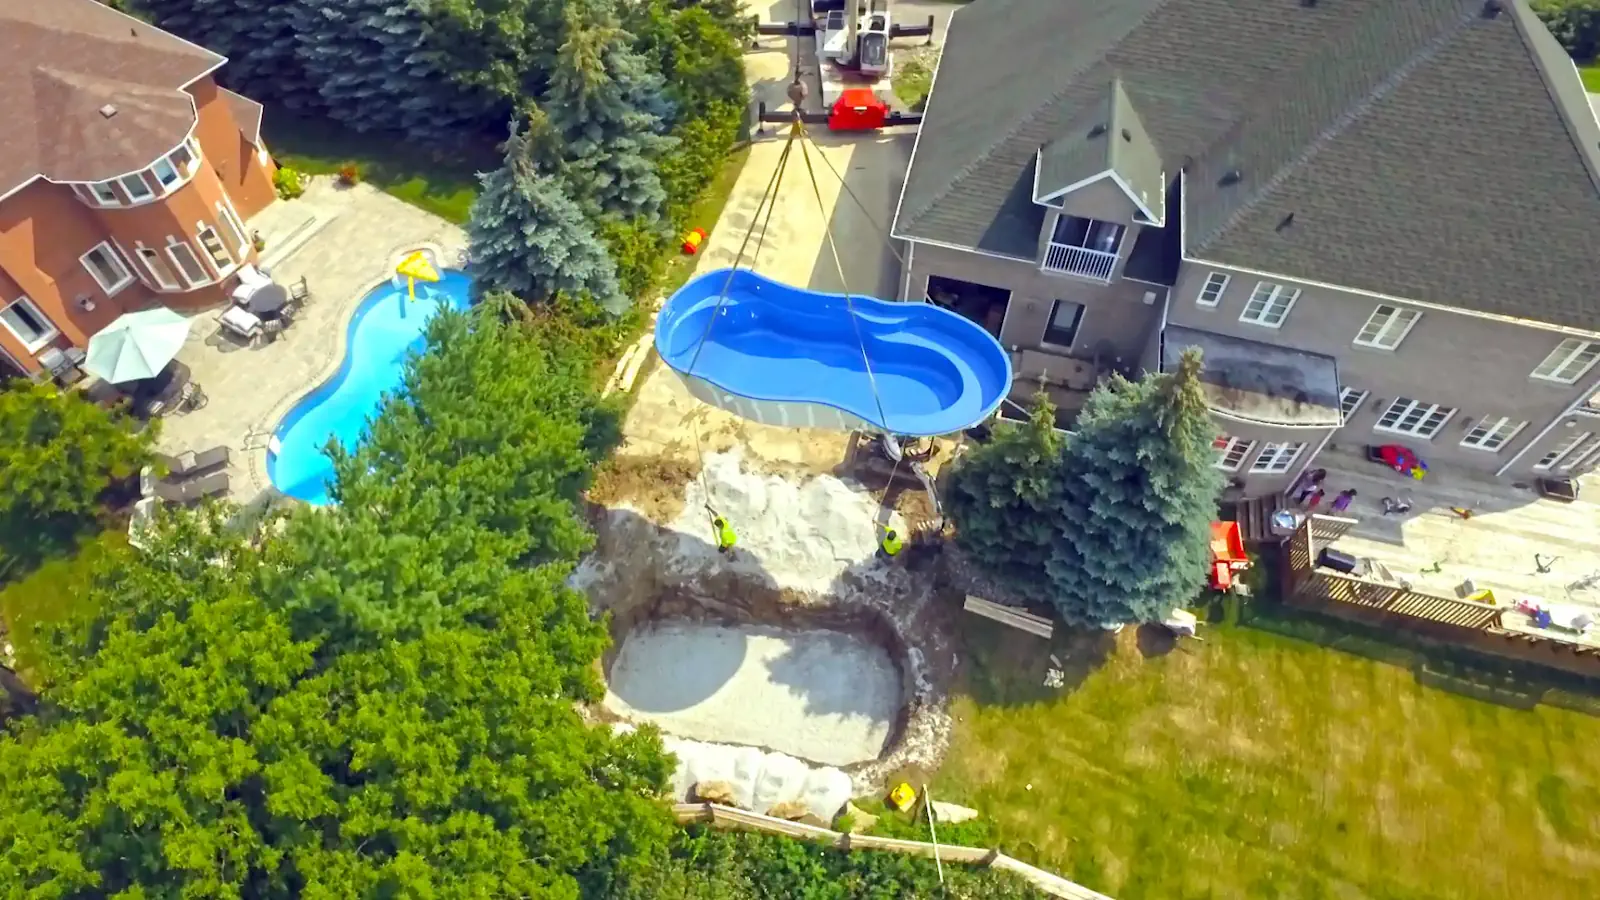 Why pool installers should offer pool servicing